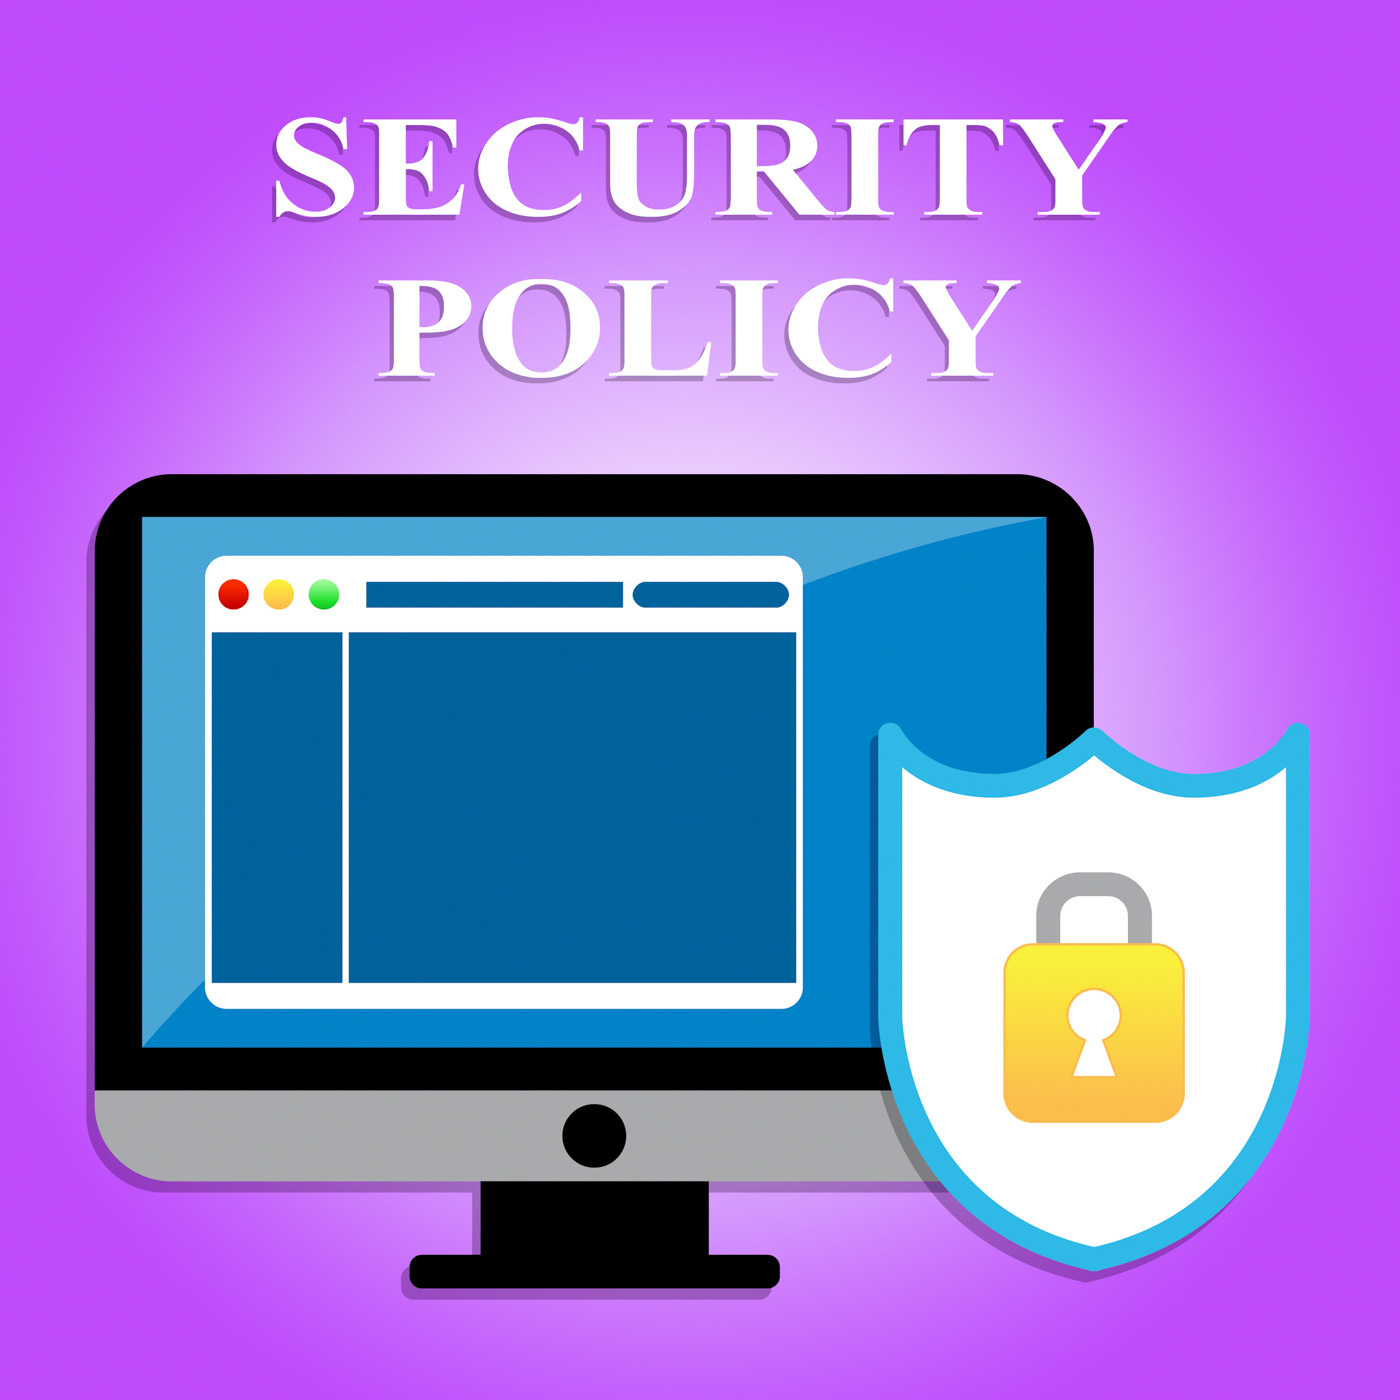 Security policy represents privacy agreement and computers photo